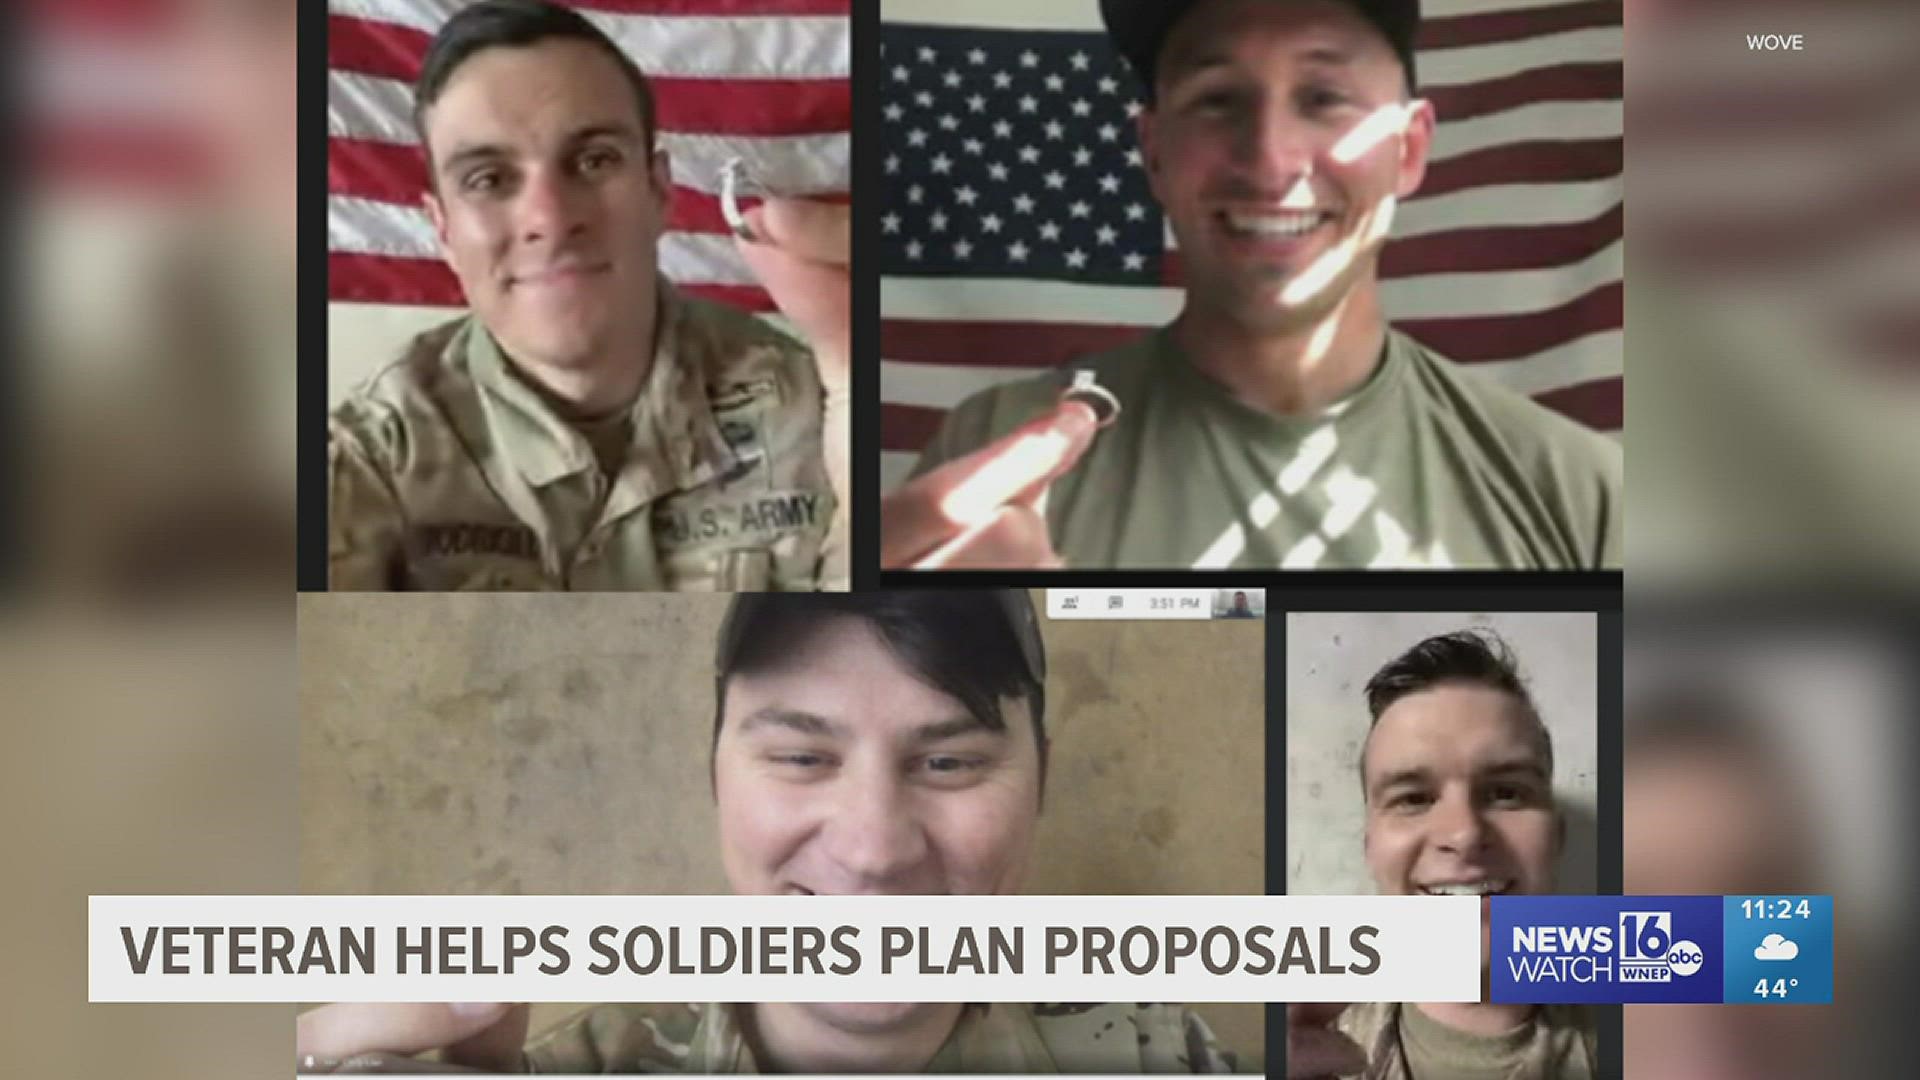 A veteran from Pennsylvania is doing everything he can to ease soldiers' stress of tying the knot. He's using his business to help create that special moment.